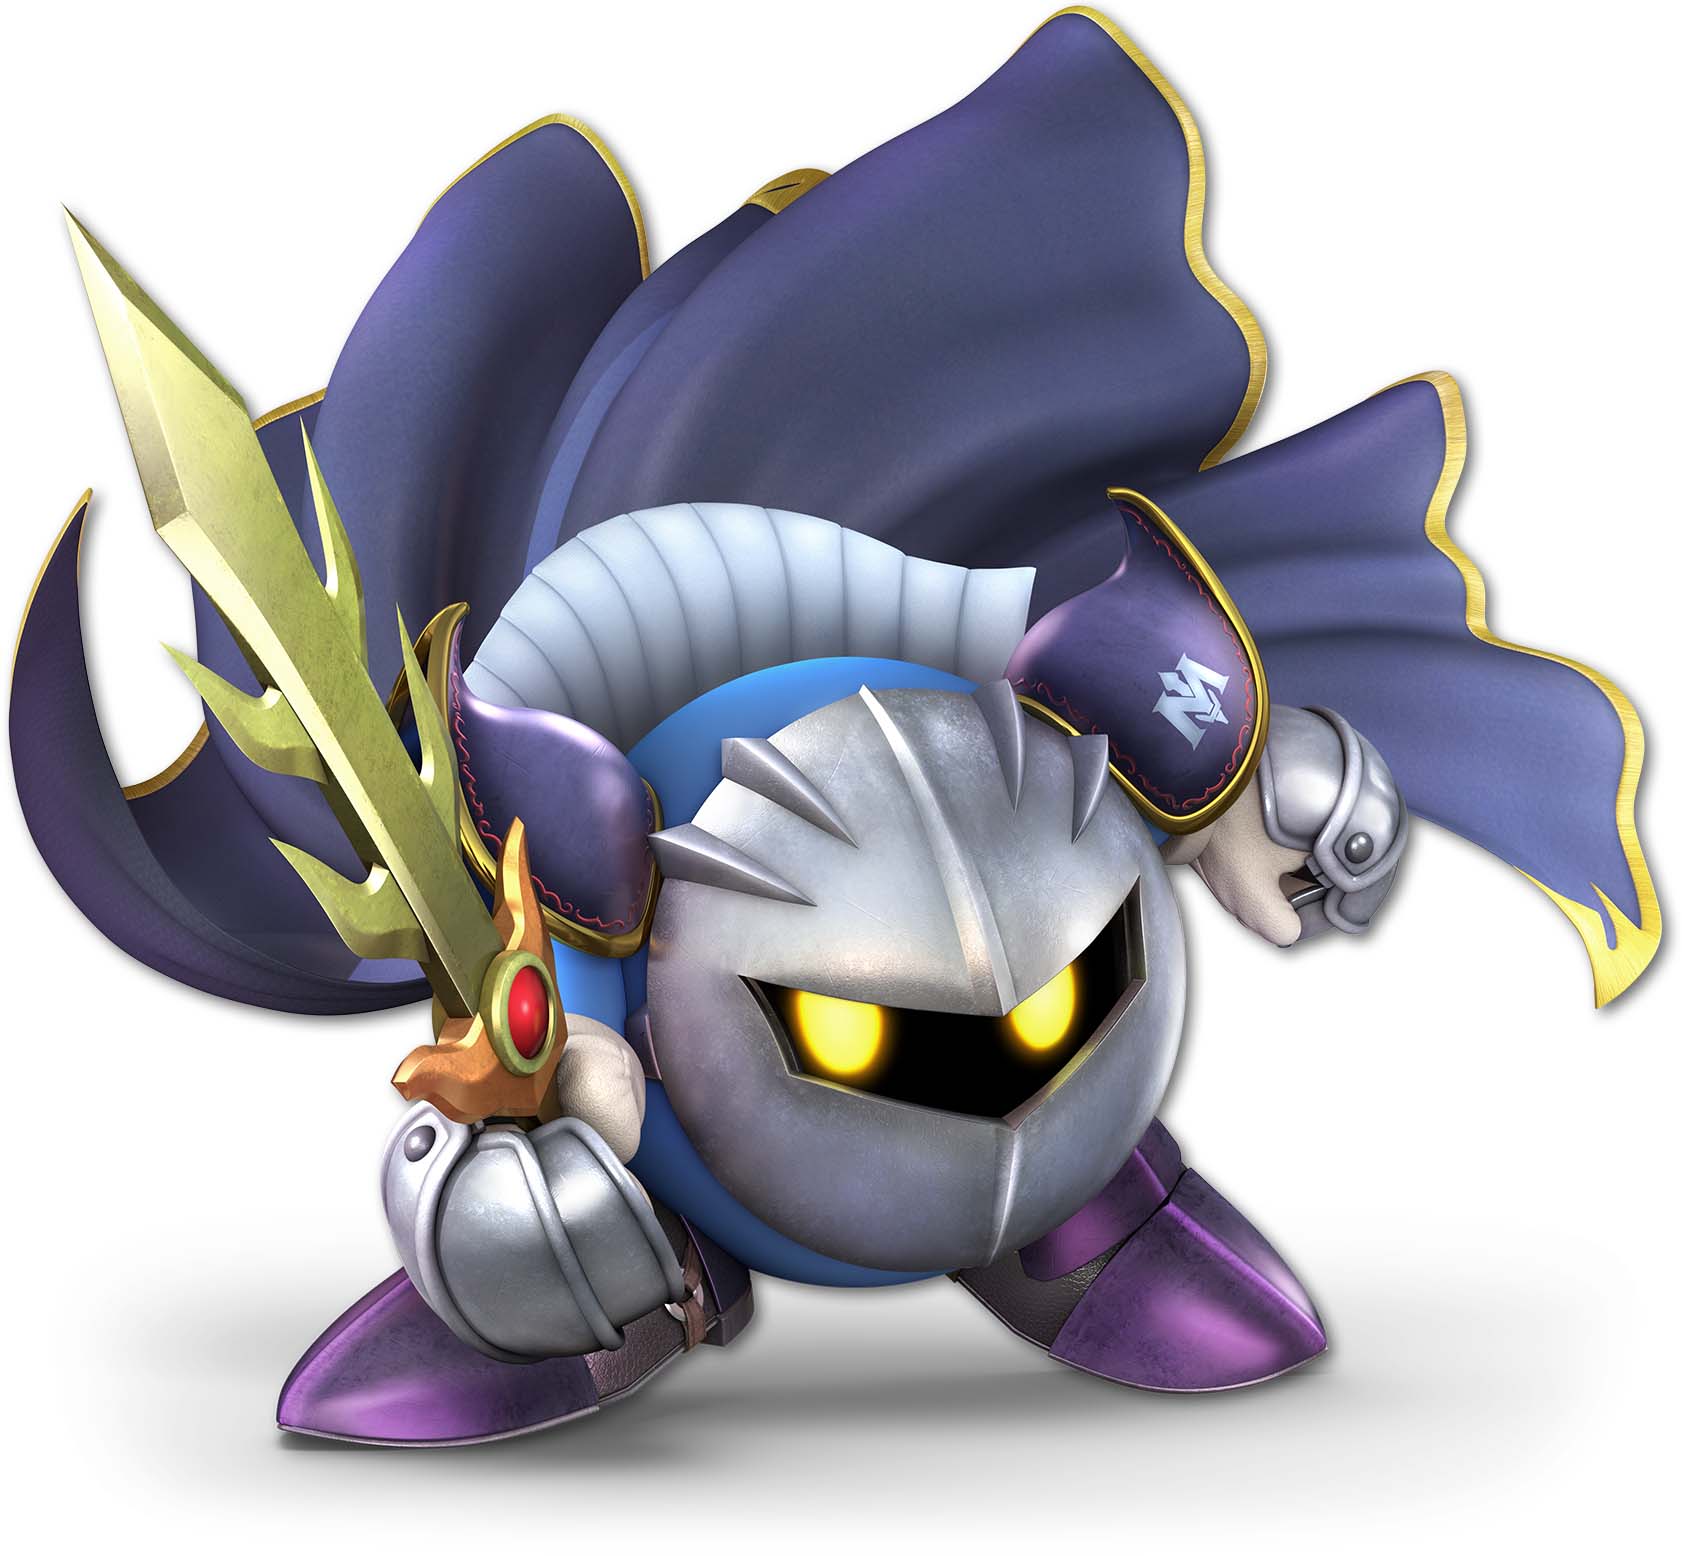 How to counter Meta Knight with Lucina in Super Smash Bros. Ultimate